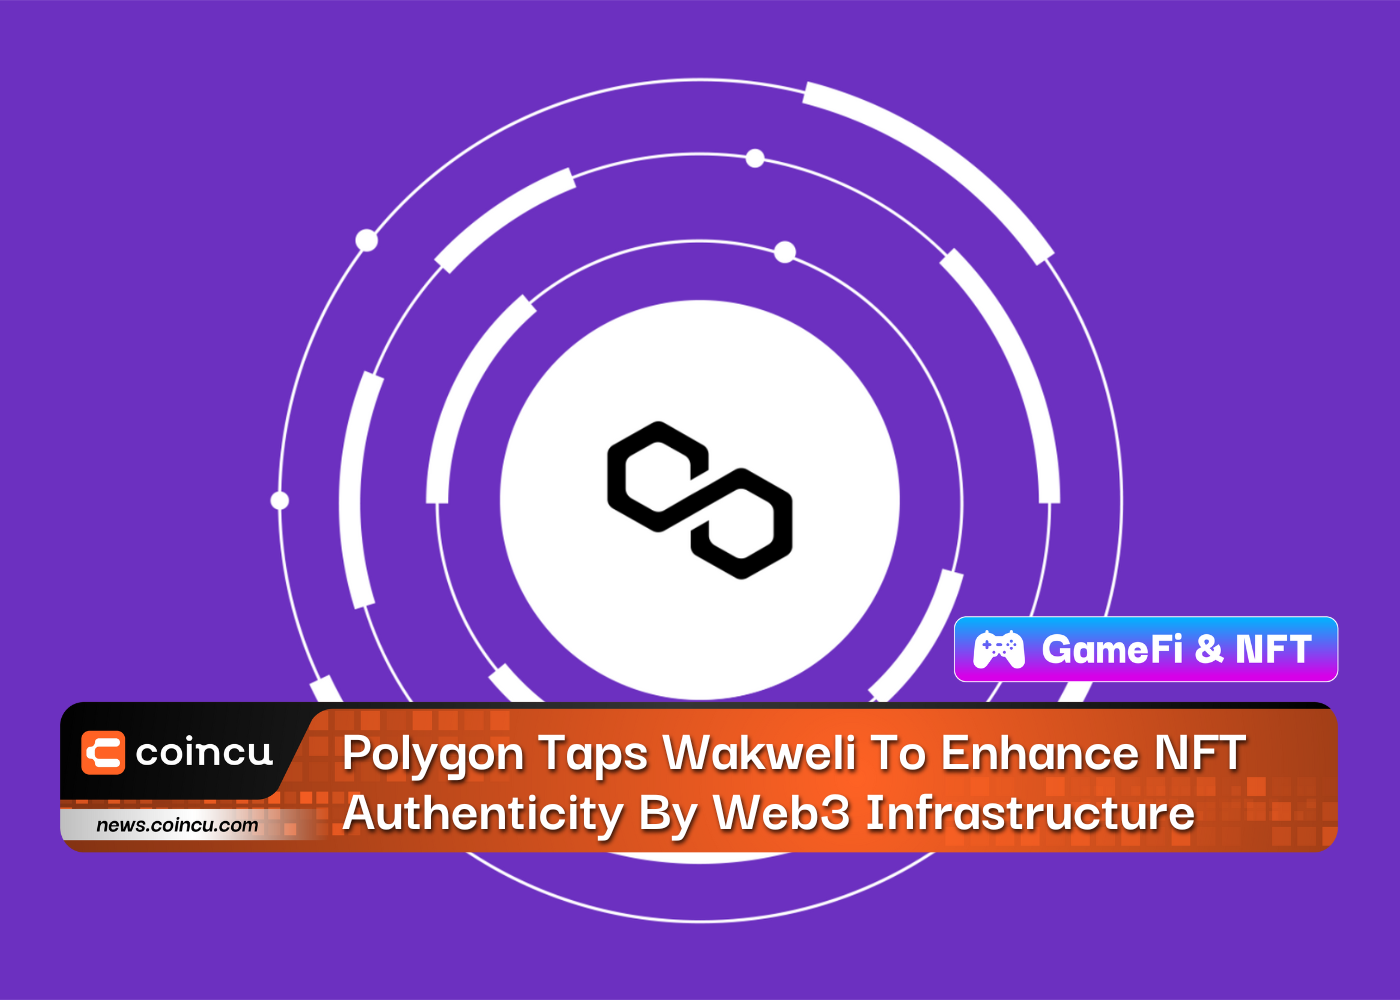 Polygon Taps Wakweli To Enhance NFT Authenticity By Web3 Infrastructure